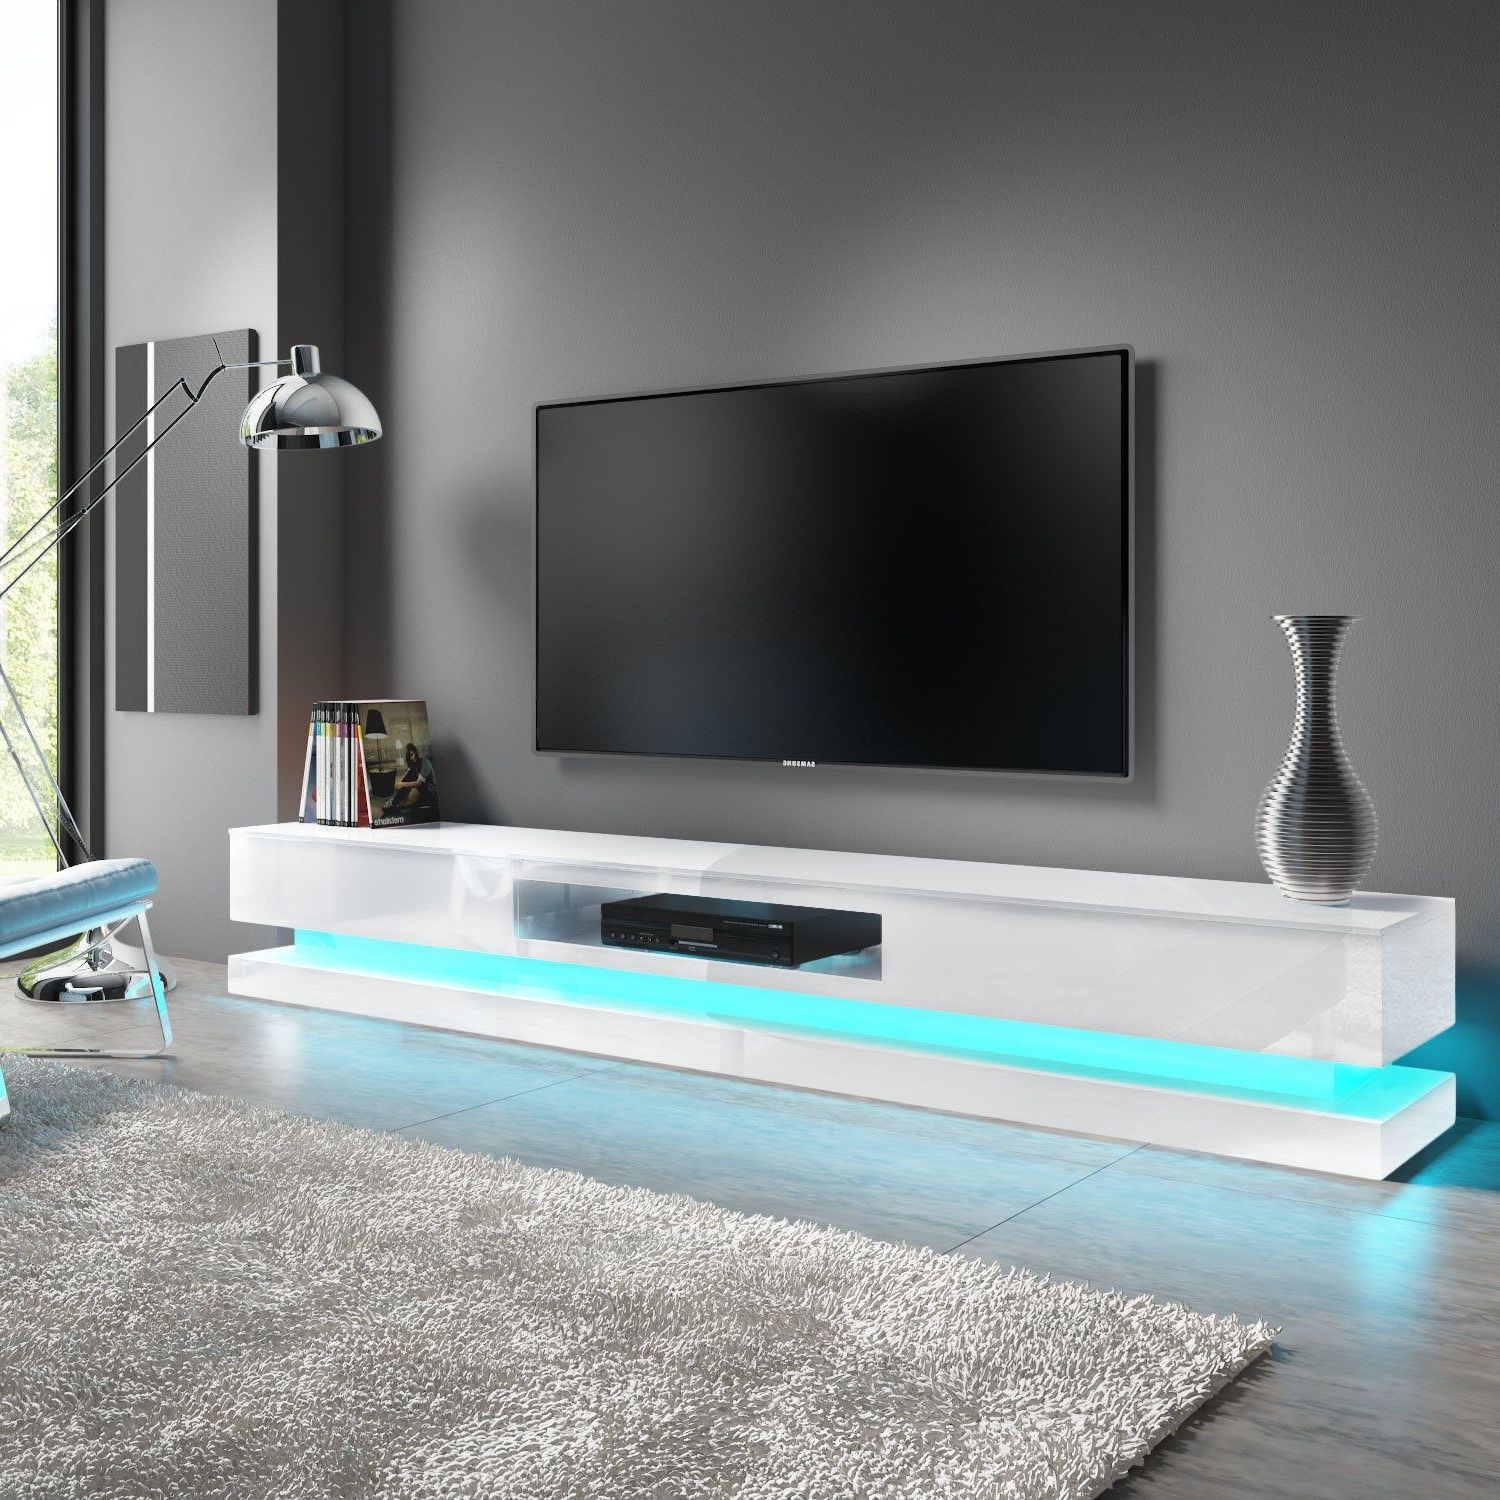 Wide White Gloss Tv Stand With Storage & Leds – Tv's Up To 70" – Evoque  Fol300300 E Xl | Appliances… | High Gloss Tv Unit, White Tv Stands, Tv Stand  With Led Lights In Tv Stands With Lights (View 11 of 20)